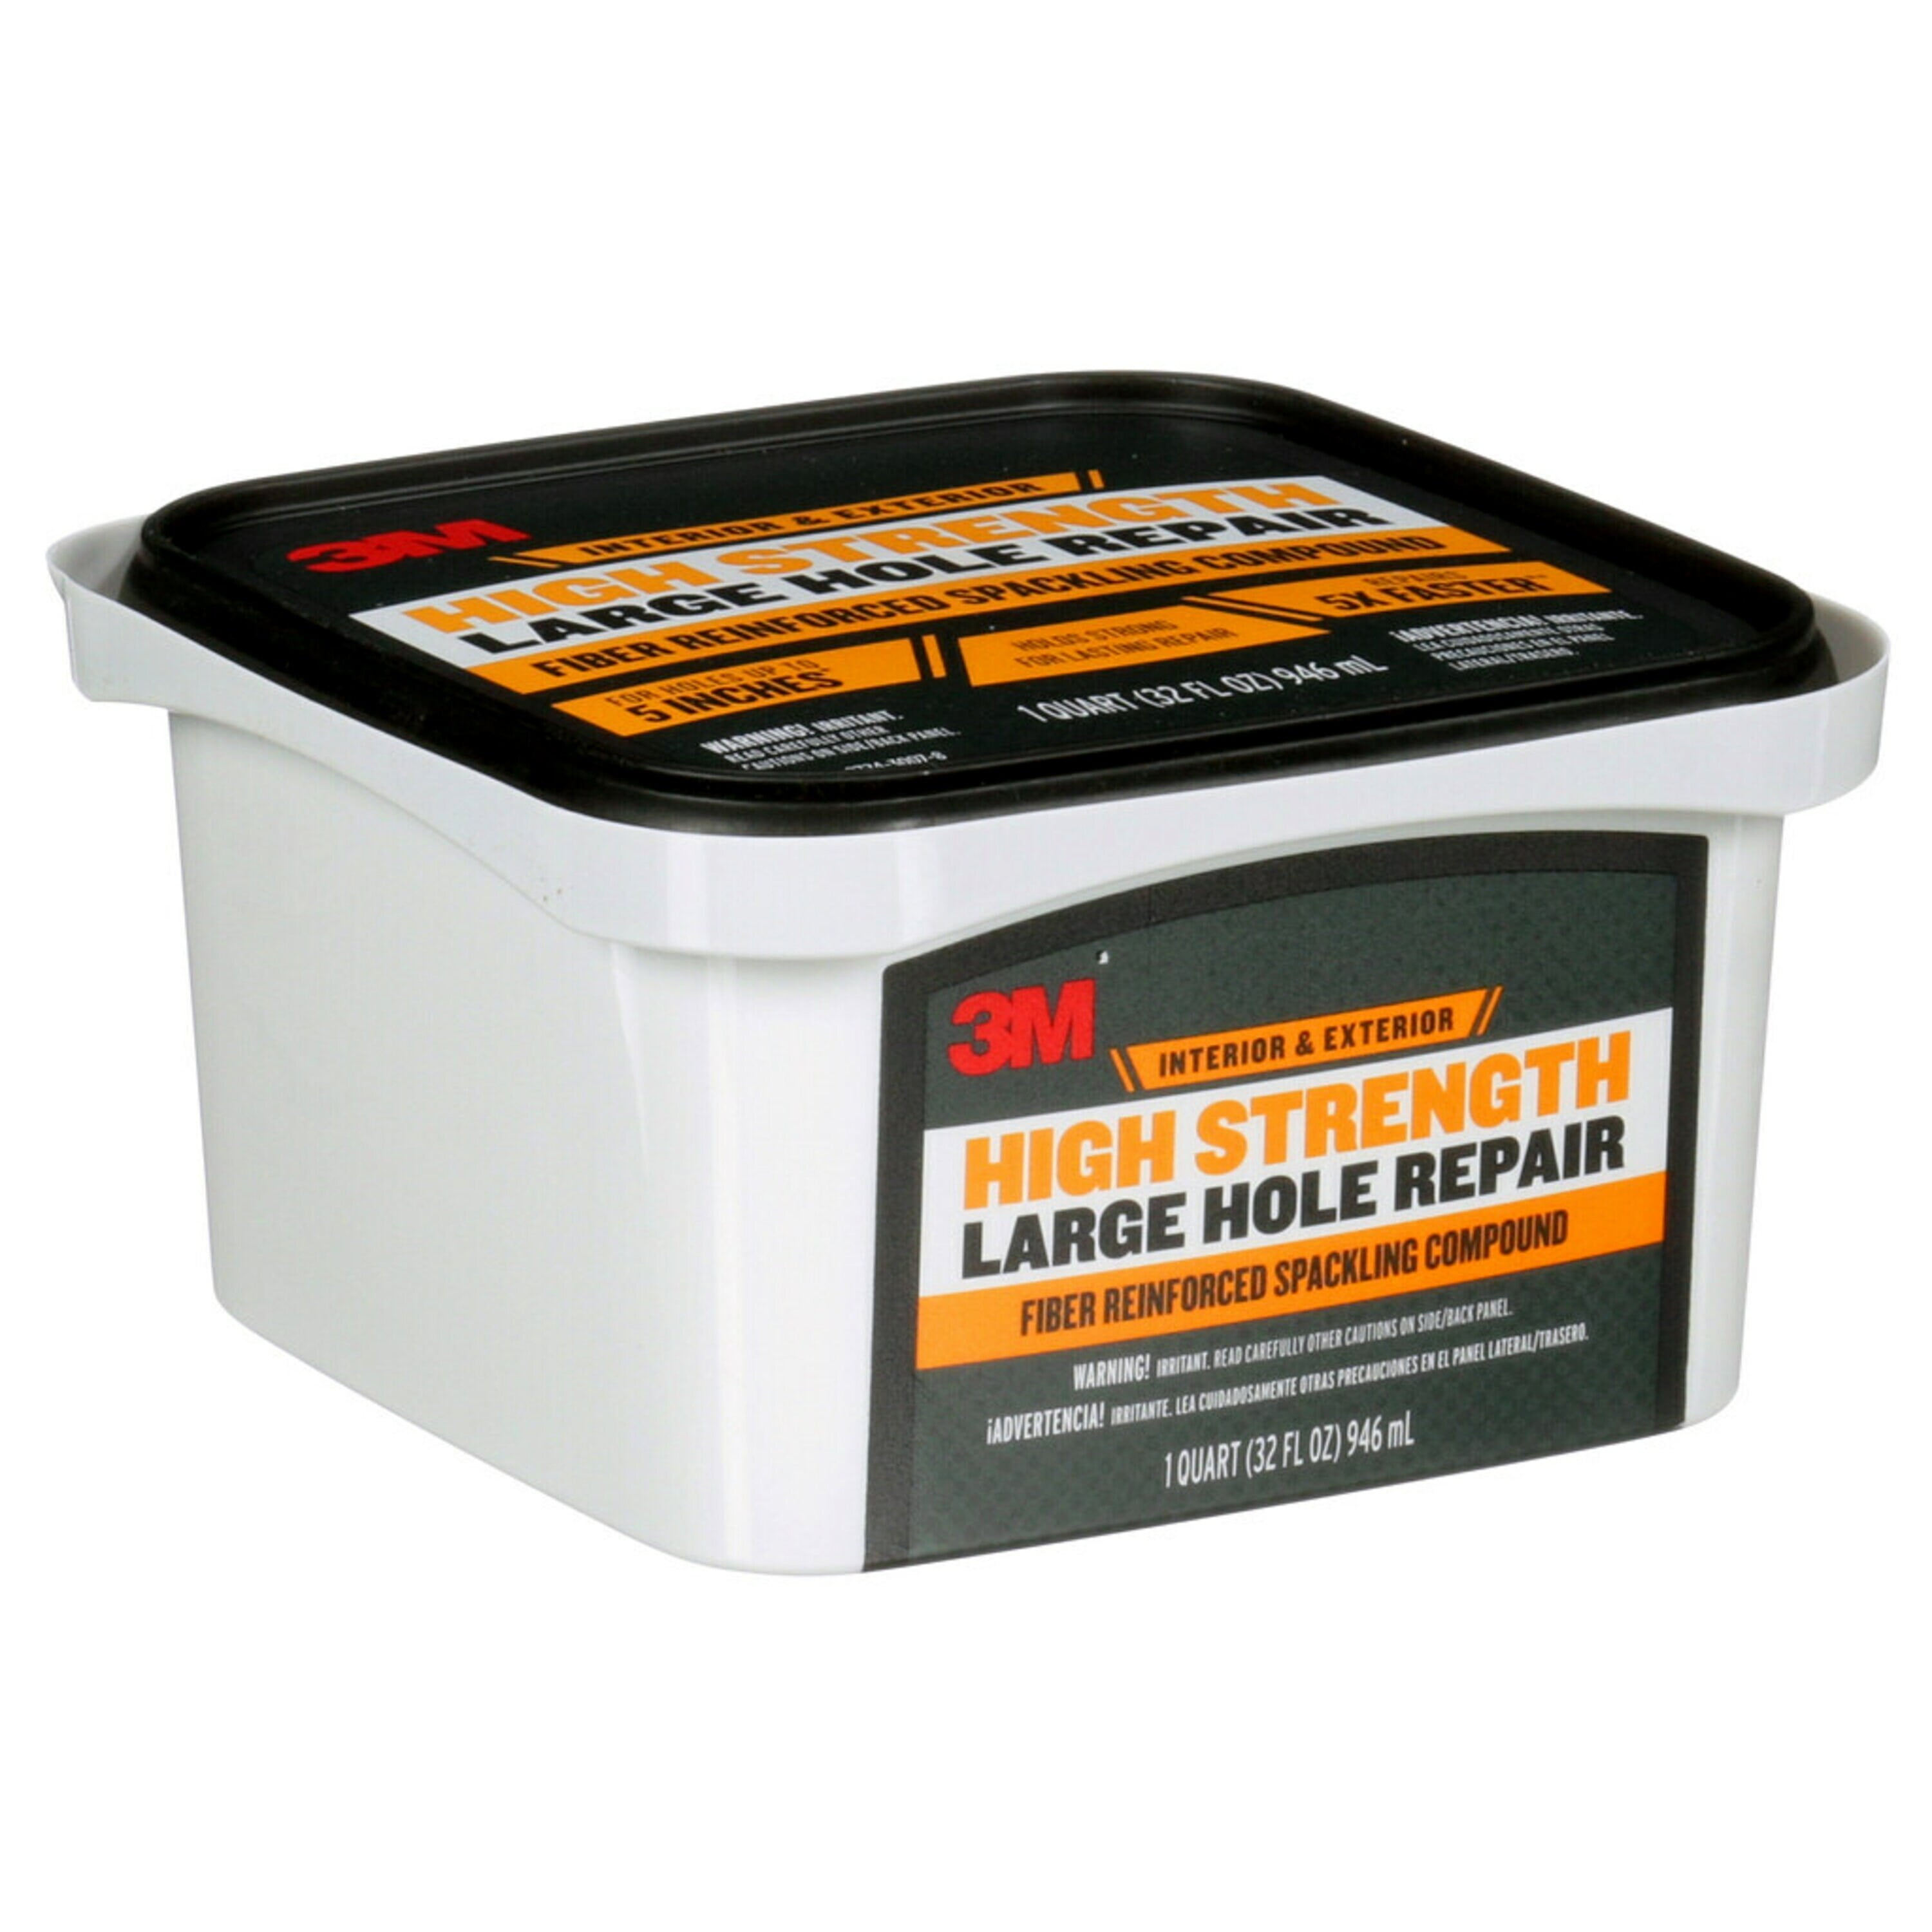 3M High Strength Large Hole Wall Filler, Fiber Reinforced, Interior and  Exterior Use, White, 32 oz.